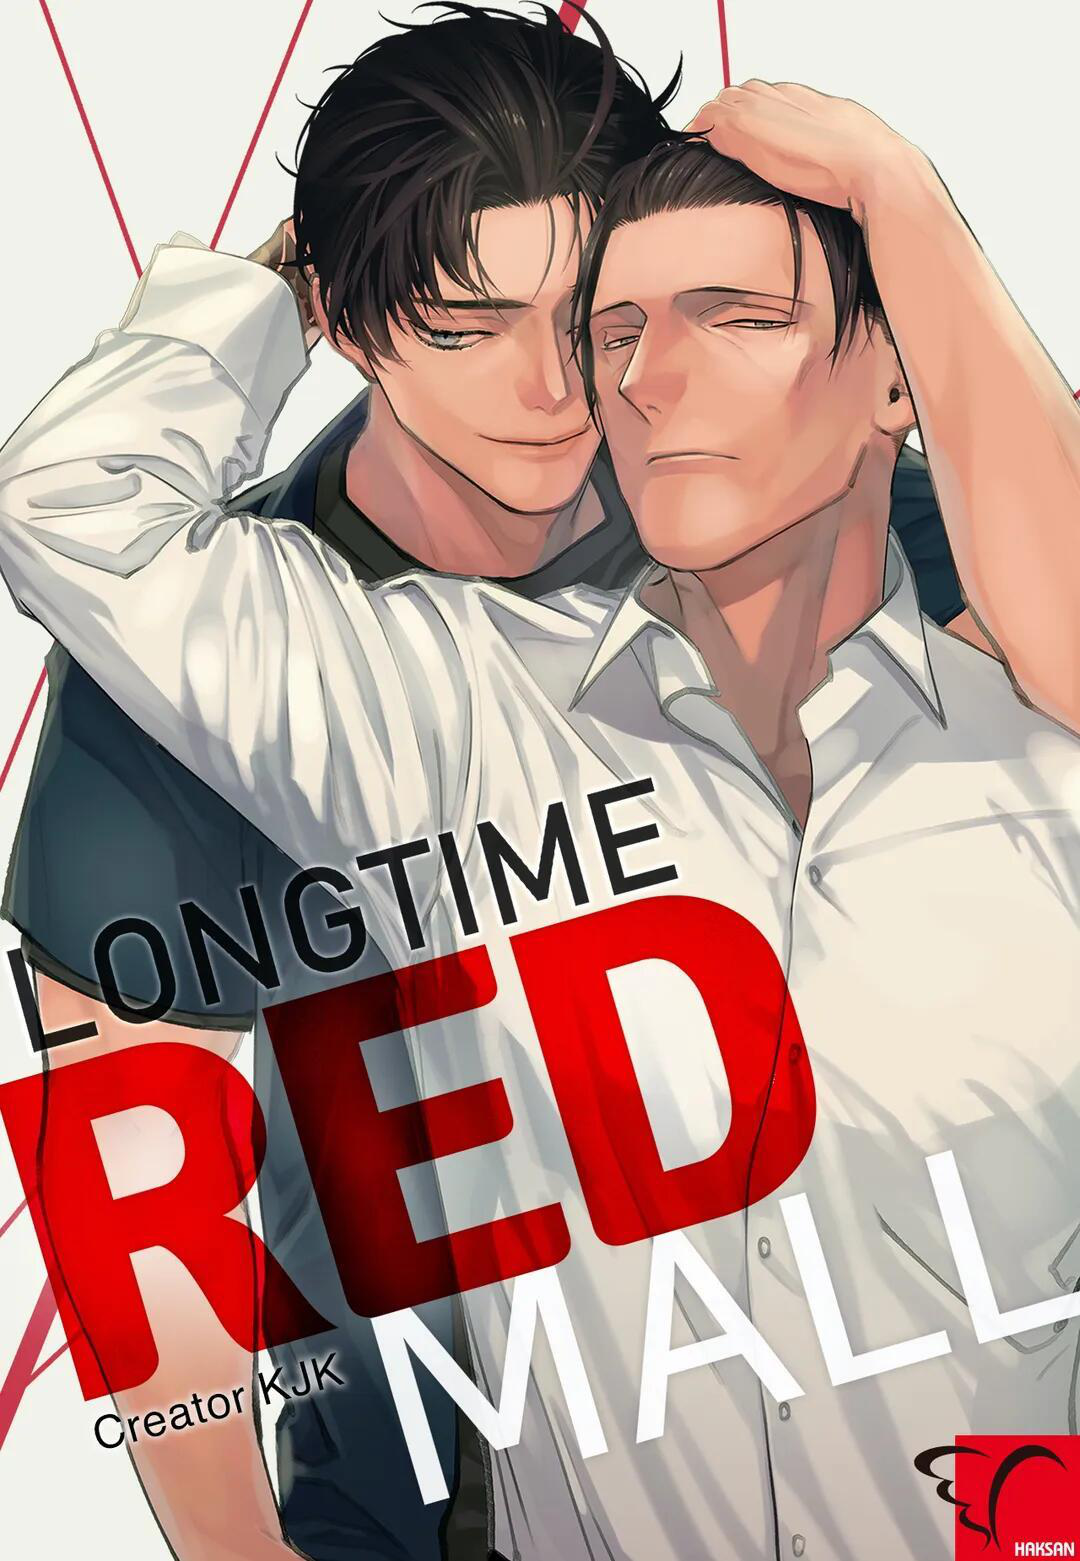 Long Time Red Mall - chapter 34 - #2